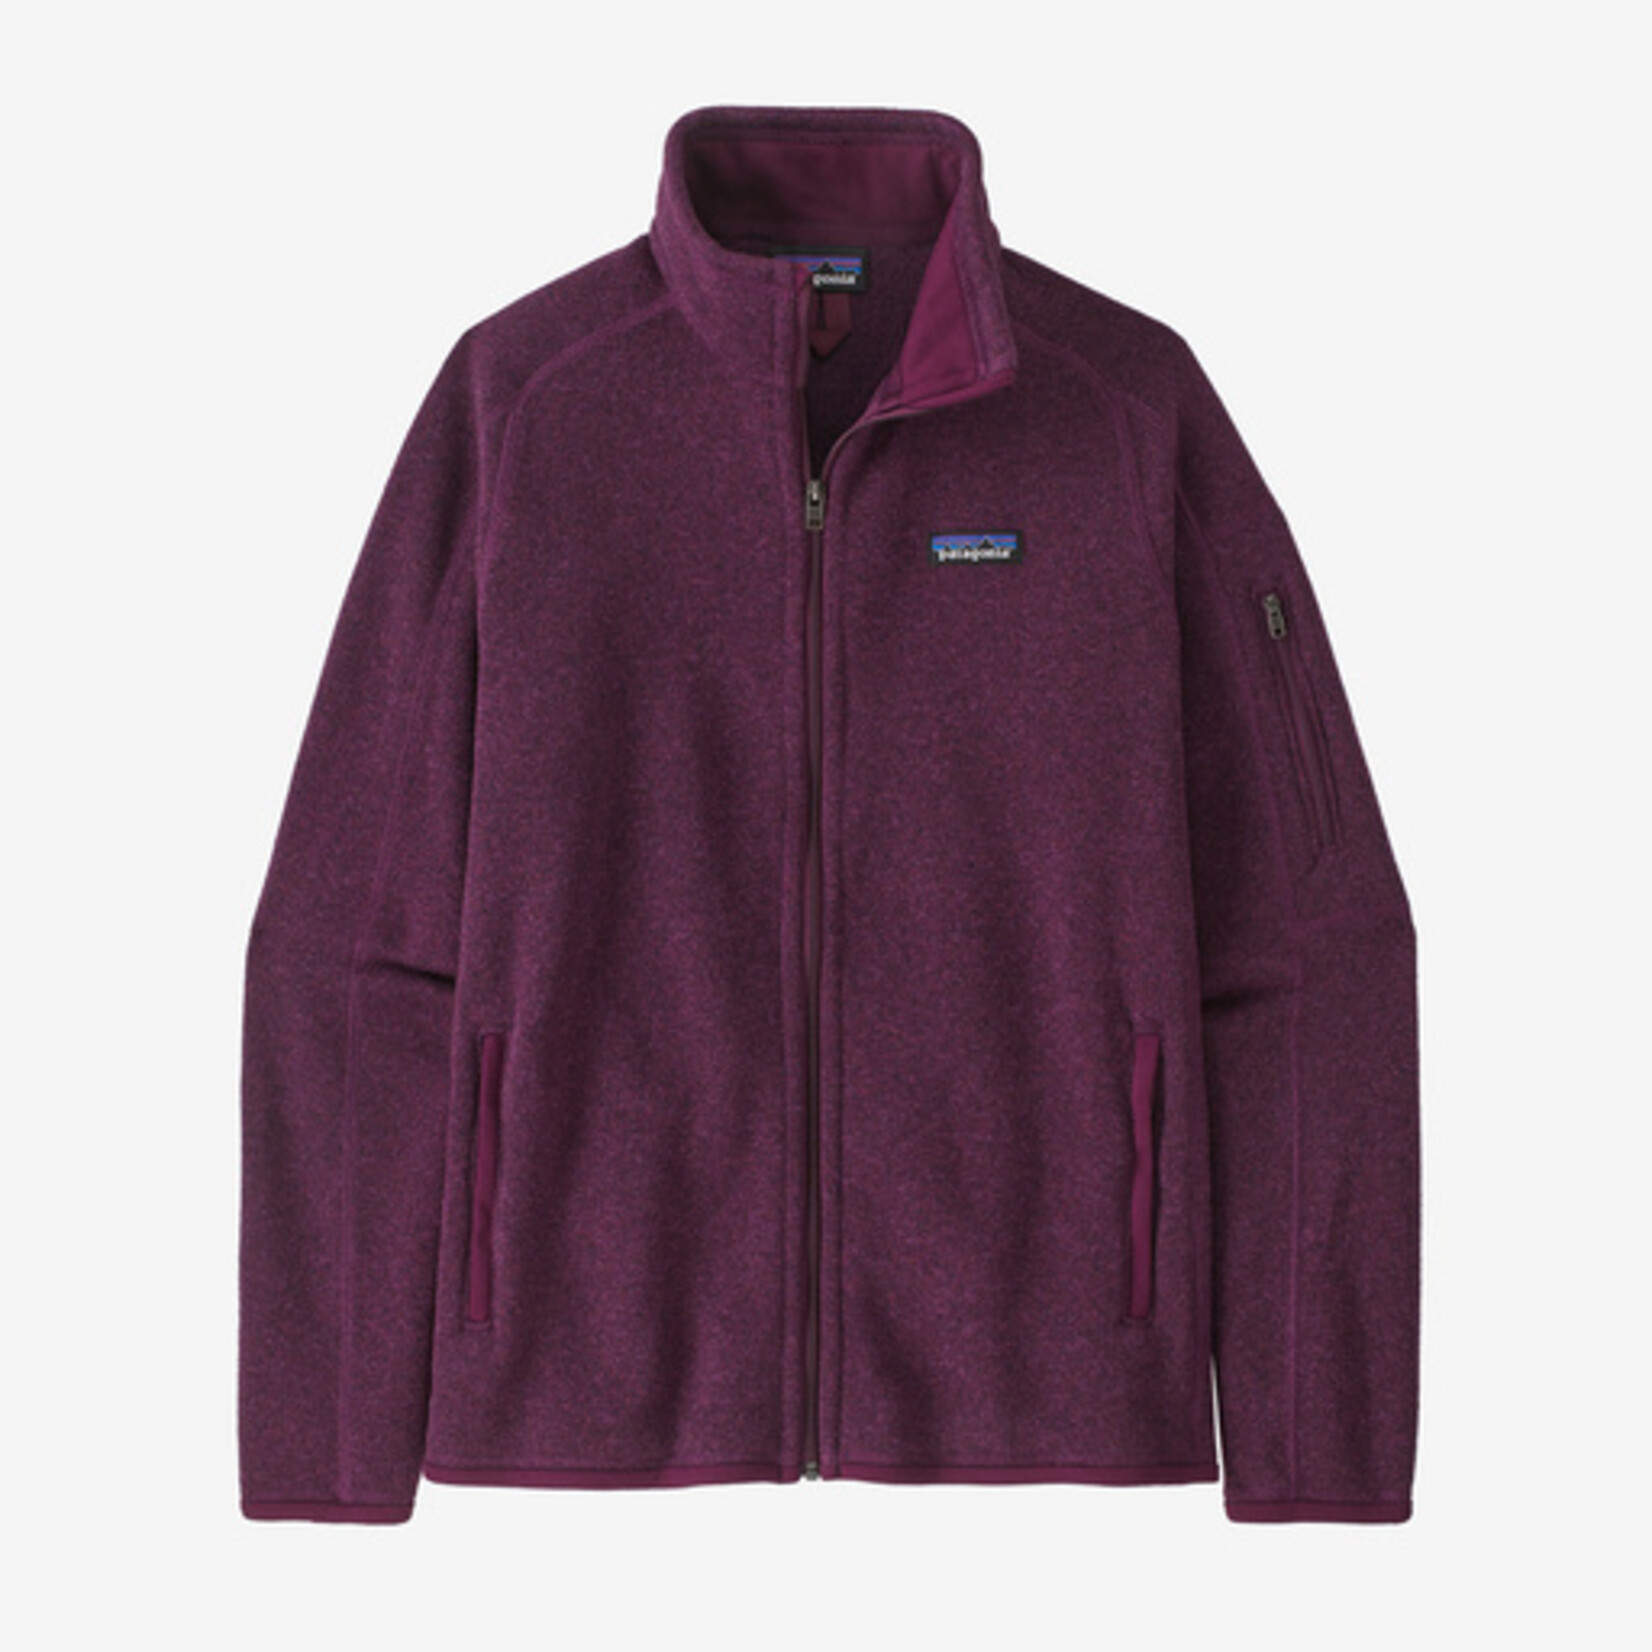 Patagonia W’s Better sweater jacket